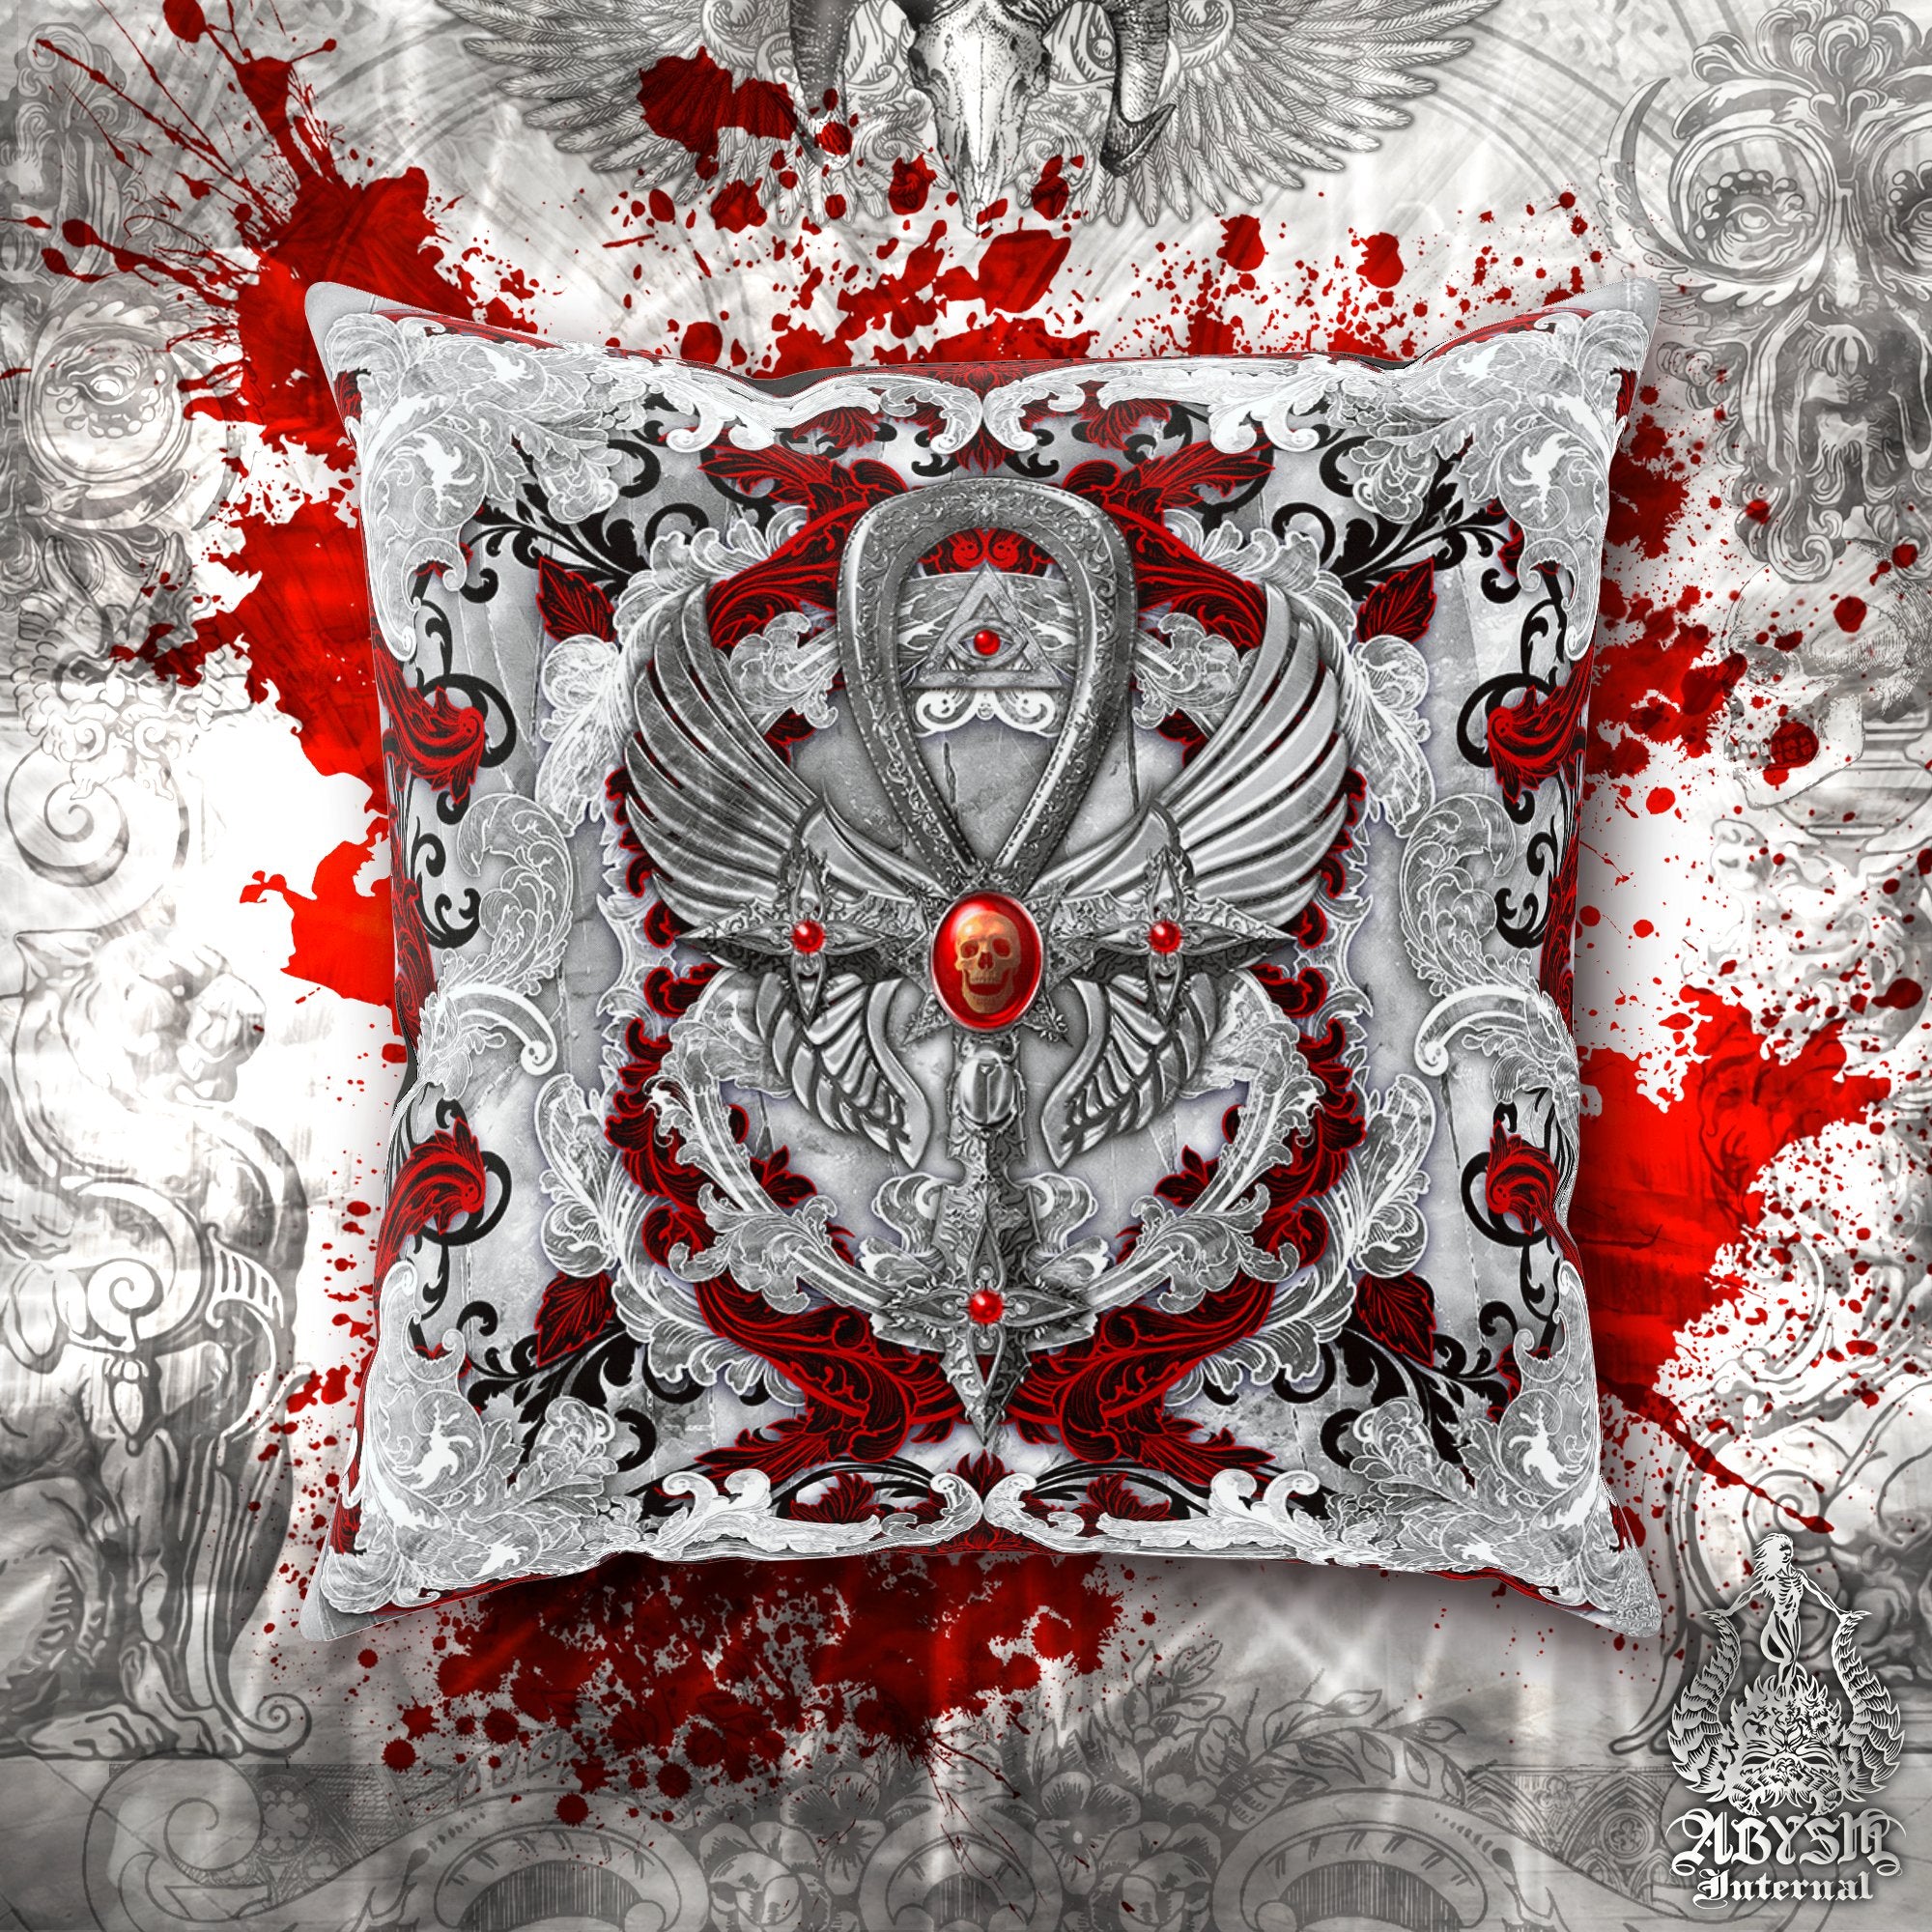 Bloody White Goth Throw Pillow, Decorative Accent Pillow, Square Cushion Cover, Gothic Room Decor, Alternative Home - Ankh Cross Art, Black, Red, 3 Colors - Abysm Internal